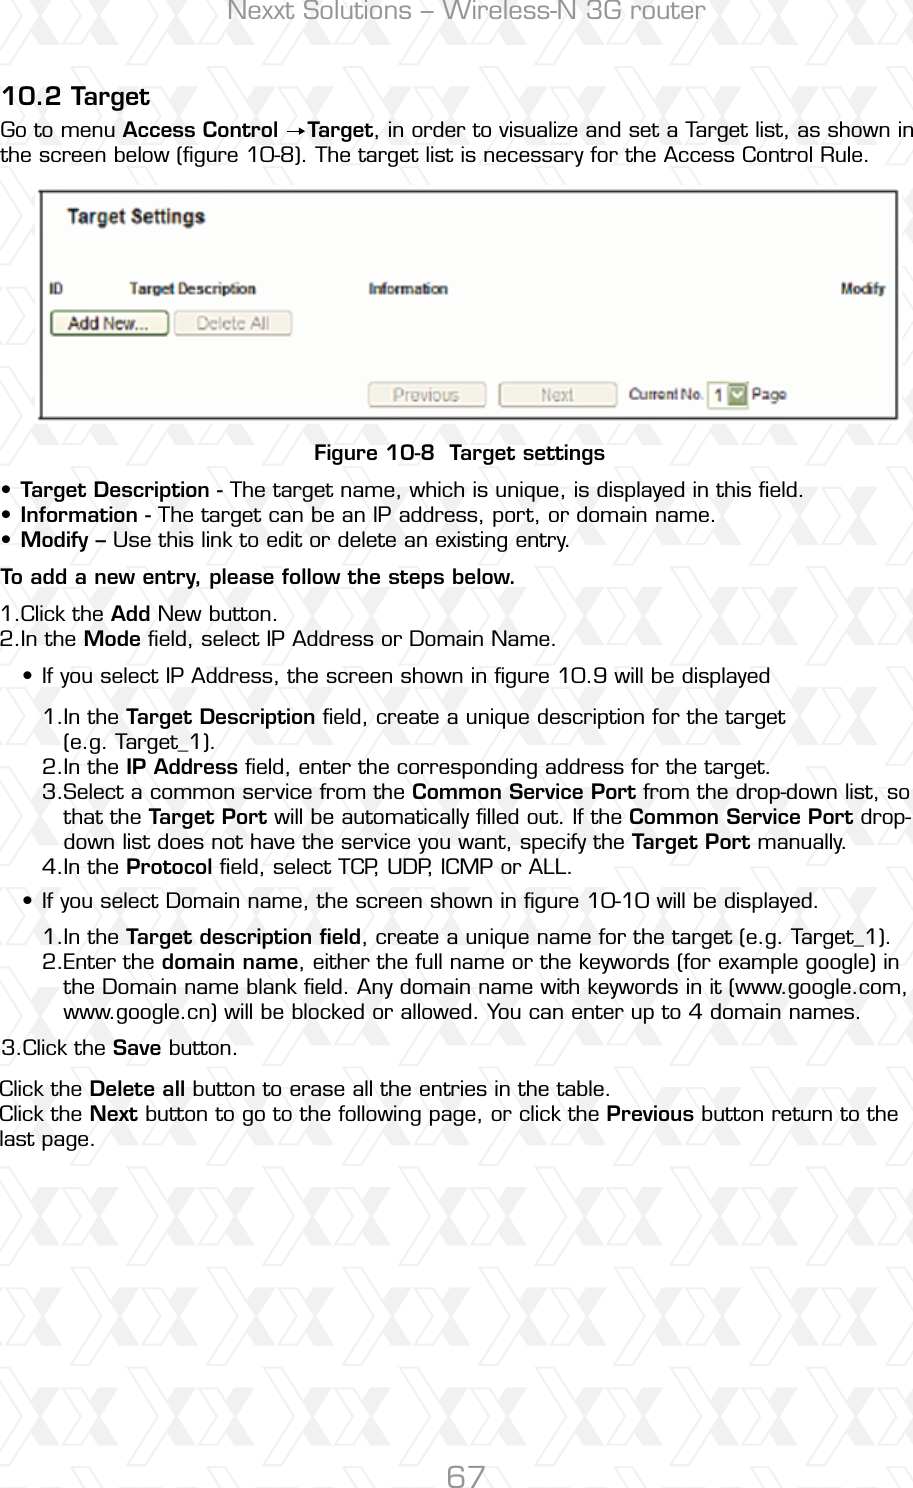 Nexxt Solutions – Wireless-N 3G router6710.2 TargetFigure 10-8  Target settingsGo to menu Access Control    Target, in order to visualize and set a Target list, as shown in the screen below (ﬁgure 10-8). The target list is necessary for the Access Control Rule.Click the Add New button.In the Mode ﬁeld, select IP Address or Domain Name.Click the Save button.In the Target Description ﬁeld, create a unique description for the target (e.g. Target_1).In the IP Address ﬁeld, enter the corresponding address for the target.Select a common service from the Common Service Port from the drop-down list, so that the Target Port will be automatically ﬁlled out. If the Common Service Port drop-down list does not have the service you want, specify the Target Port manually.In the Protocol ﬁeld, select TCP, UDP, ICMP or ALL. In the Target description ﬁeld, create a unique name for the target (e.g. Target_1).Enter the domain name, either the full name or the keywords (for example google) in the Domain name blank ﬁeld. Any domain name with keywords in it (www.google.com, www.google.cn) will be blocked or allowed. You can enter up to 4 domain names.Click the Delete all button to erase all the entries in the table.Click the Next button to go to the following page, or click the Previous button return to the last page.1.2.3.1.2.3.4.1.2.Target Description - The target name, which is unique, is displayed in this ﬁeld. Information - The target can be an IP address, port, or domain name. Modify – Use this link to edit or delete an existing entry. If you select IP Address, the screen shown in ﬁgure 10.9 will be displayedIf you select Domain name, the screen shown in ﬁgure 10-10 will be displayed.To add a new entry, please follow the steps below.•••••